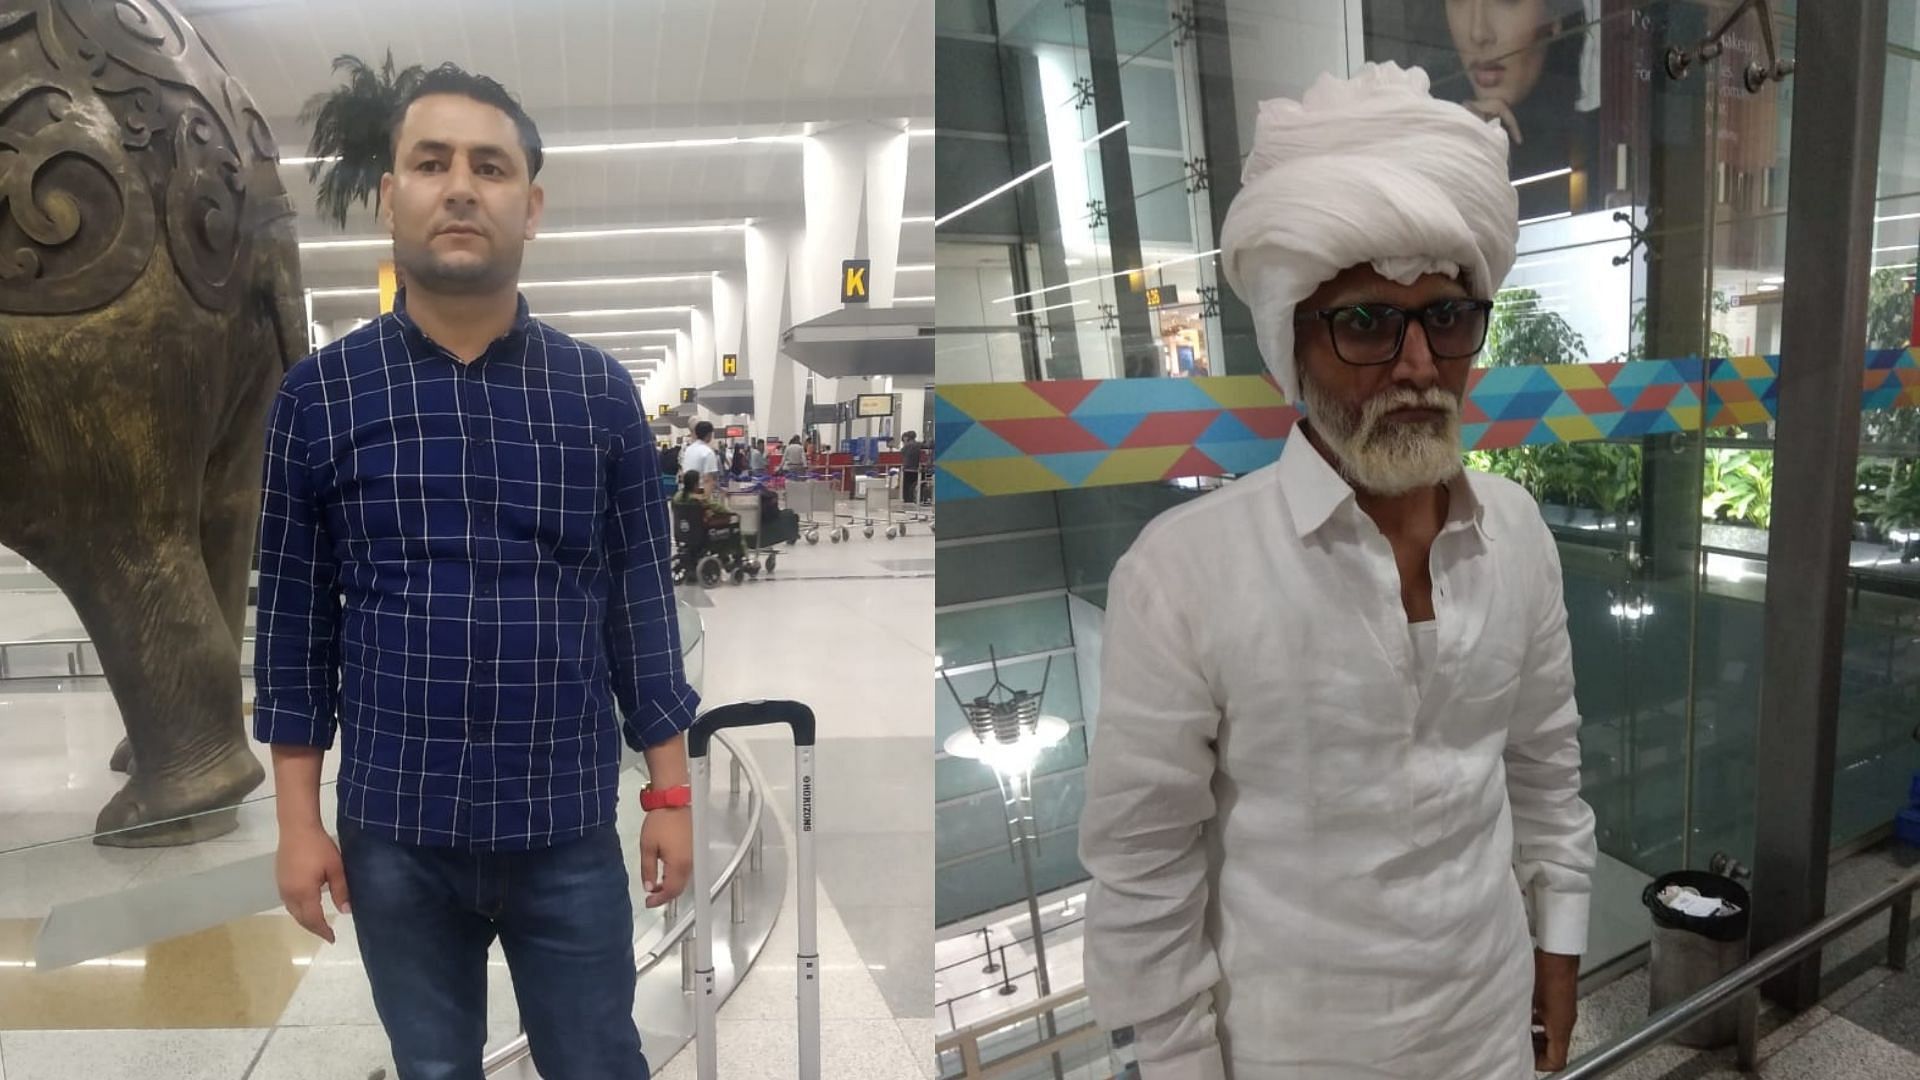 From left to right, 32 year old man who impersonated a 81 year old man at Delhi’s IGI Airport.&nbsp;